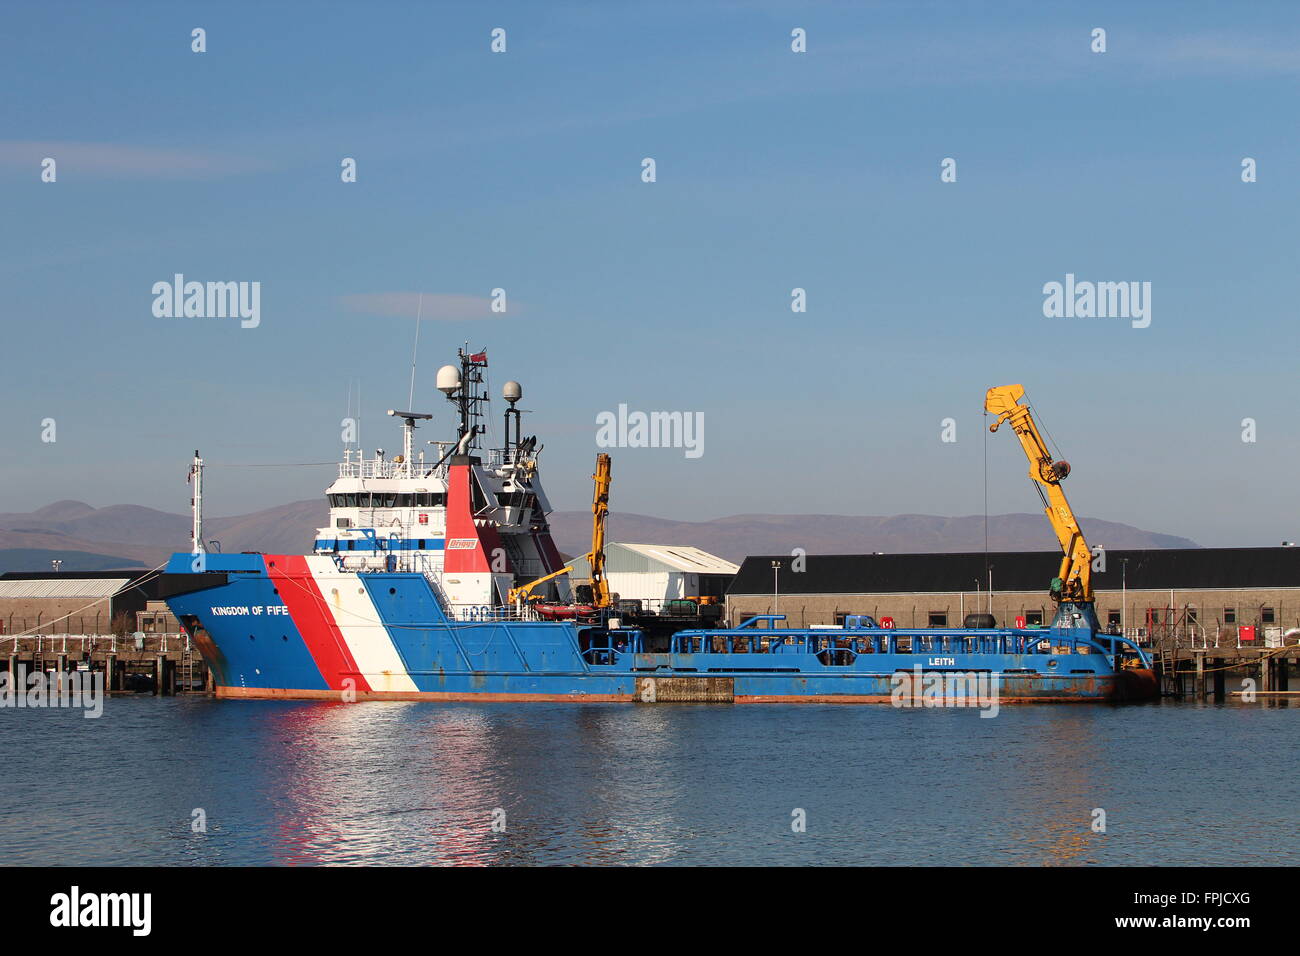 Kingdom of Fife, an offshore tug and supply vessel operated by Briggs Marine, at Great Harbour in Greenock, Inverclyde. Stock Photo